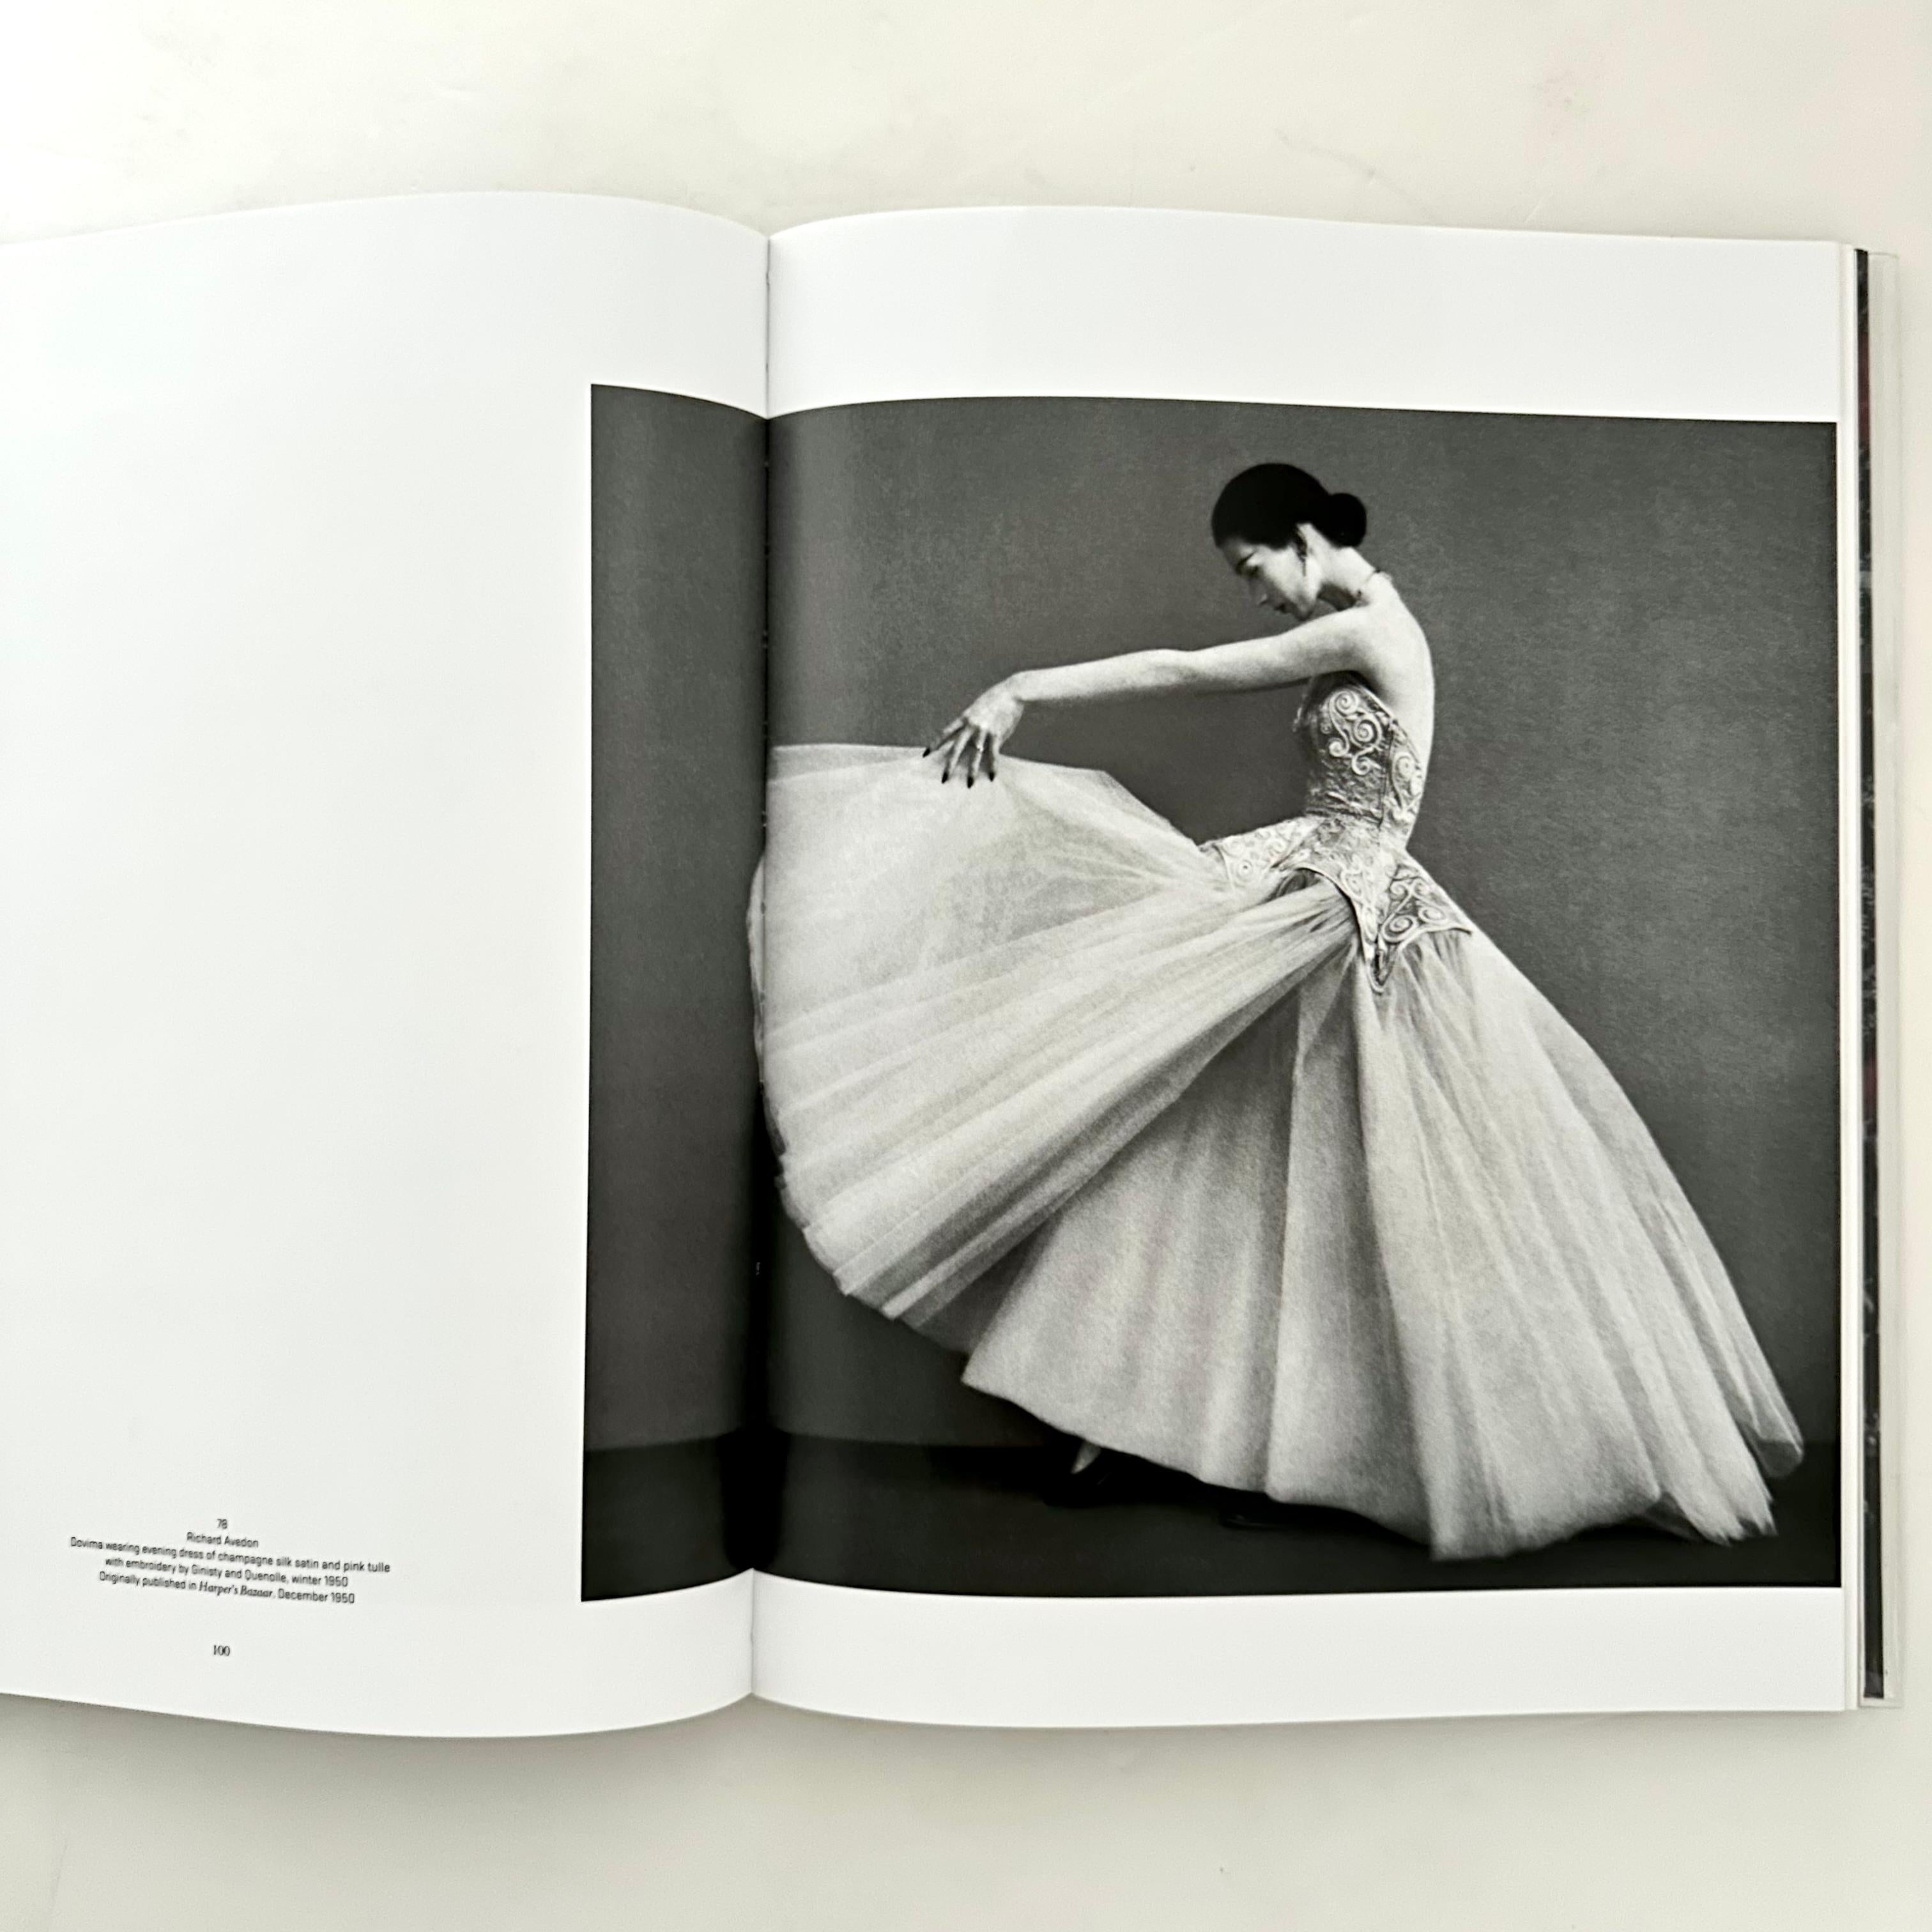 Balenciaga and Spain - Hamish Bowles - 1st Edition, New York, 2011 For Sale 1